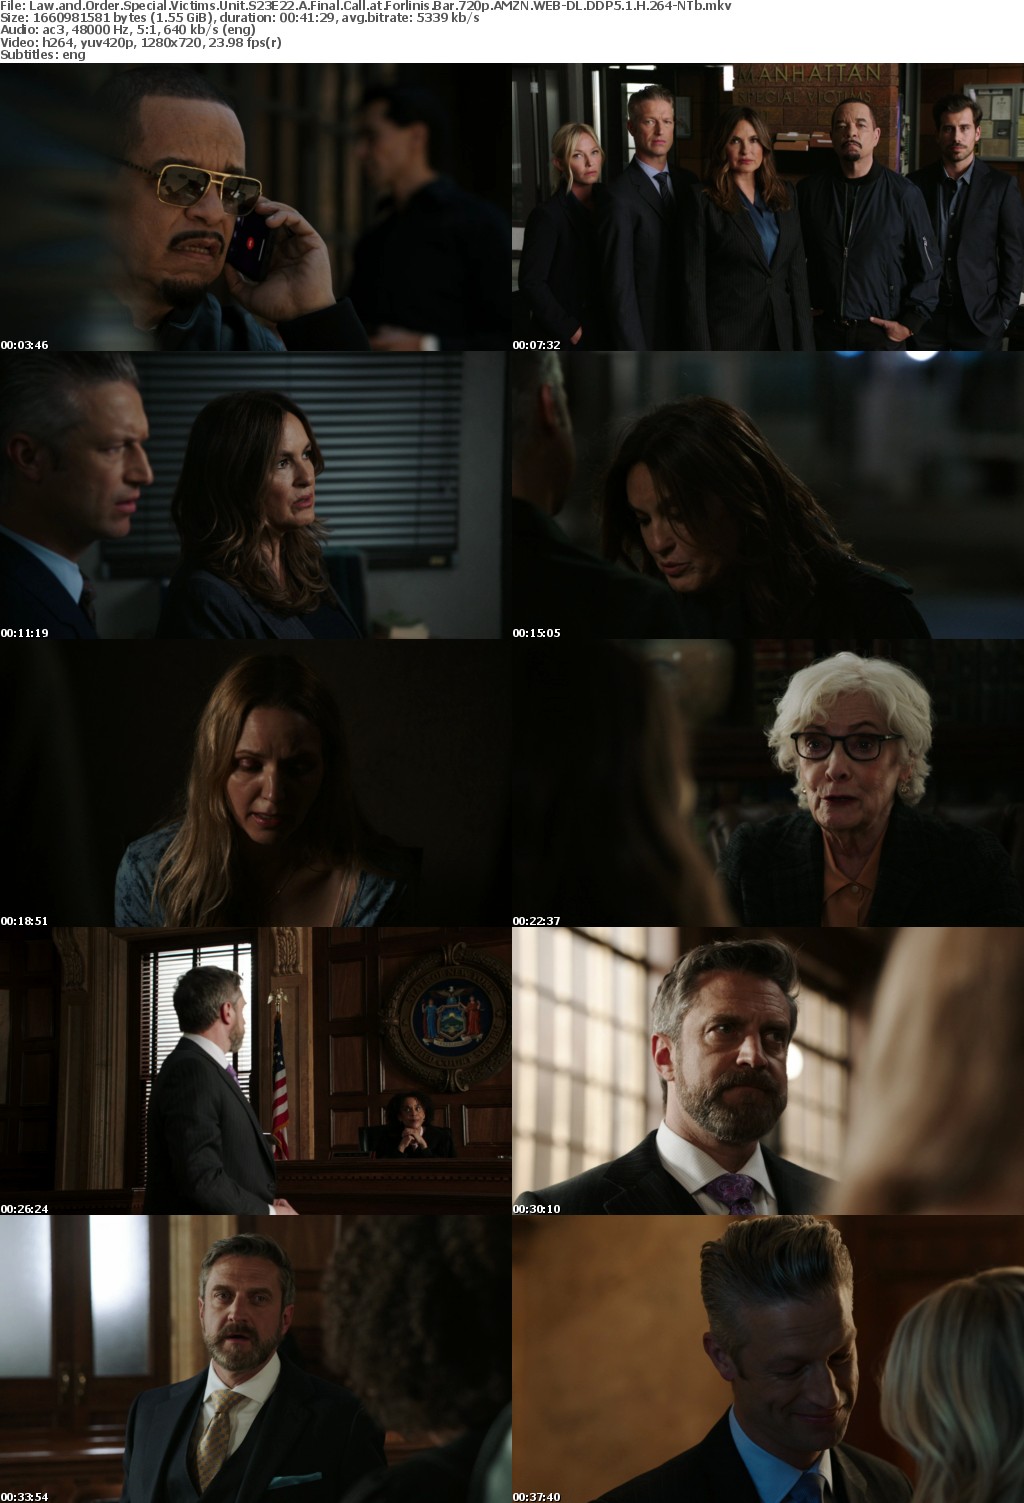 Law and Order SVU S23E22 A Final Call at Forlinis Bar 720p AMZN WEBRip DDP5 1 x264